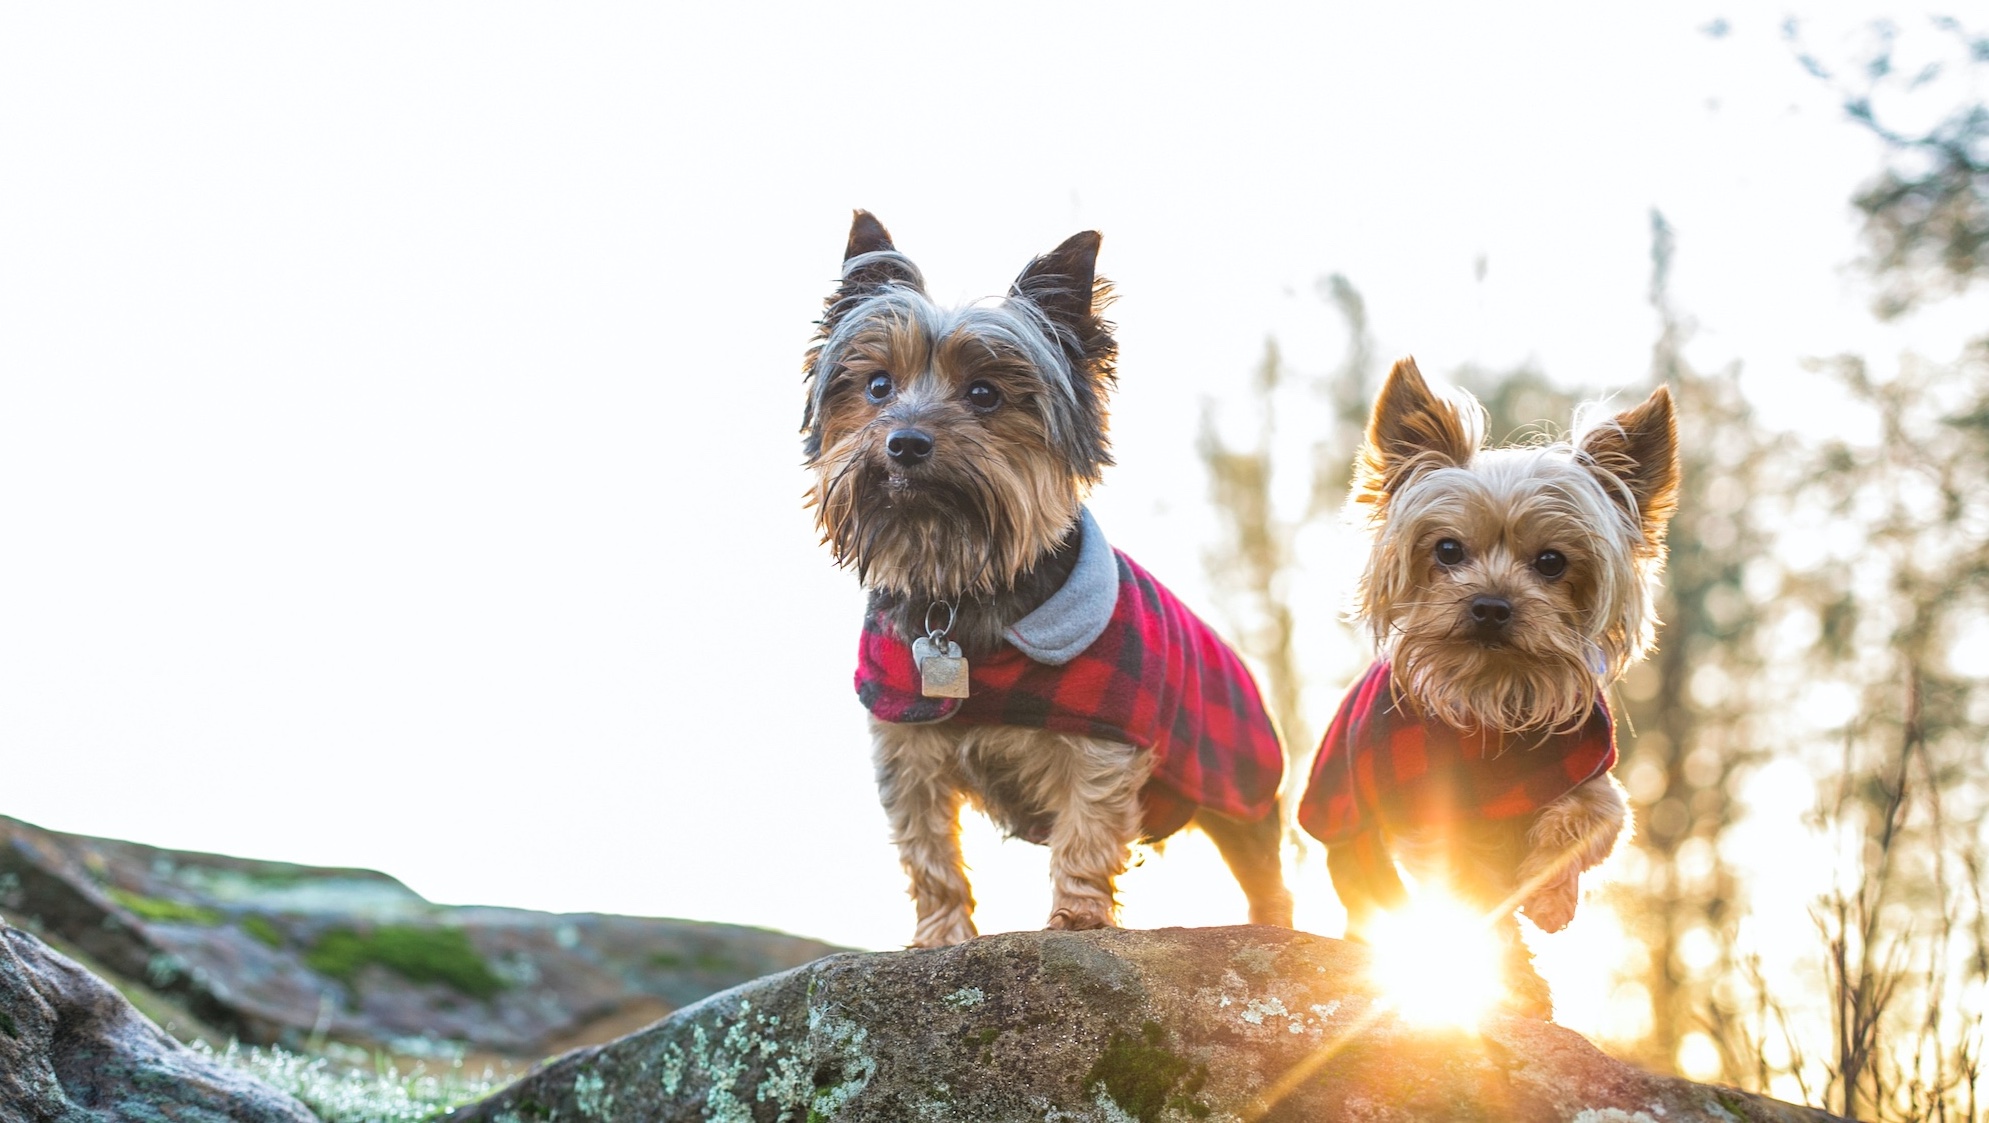 The Yorkie Guide: Food, Training, and Care